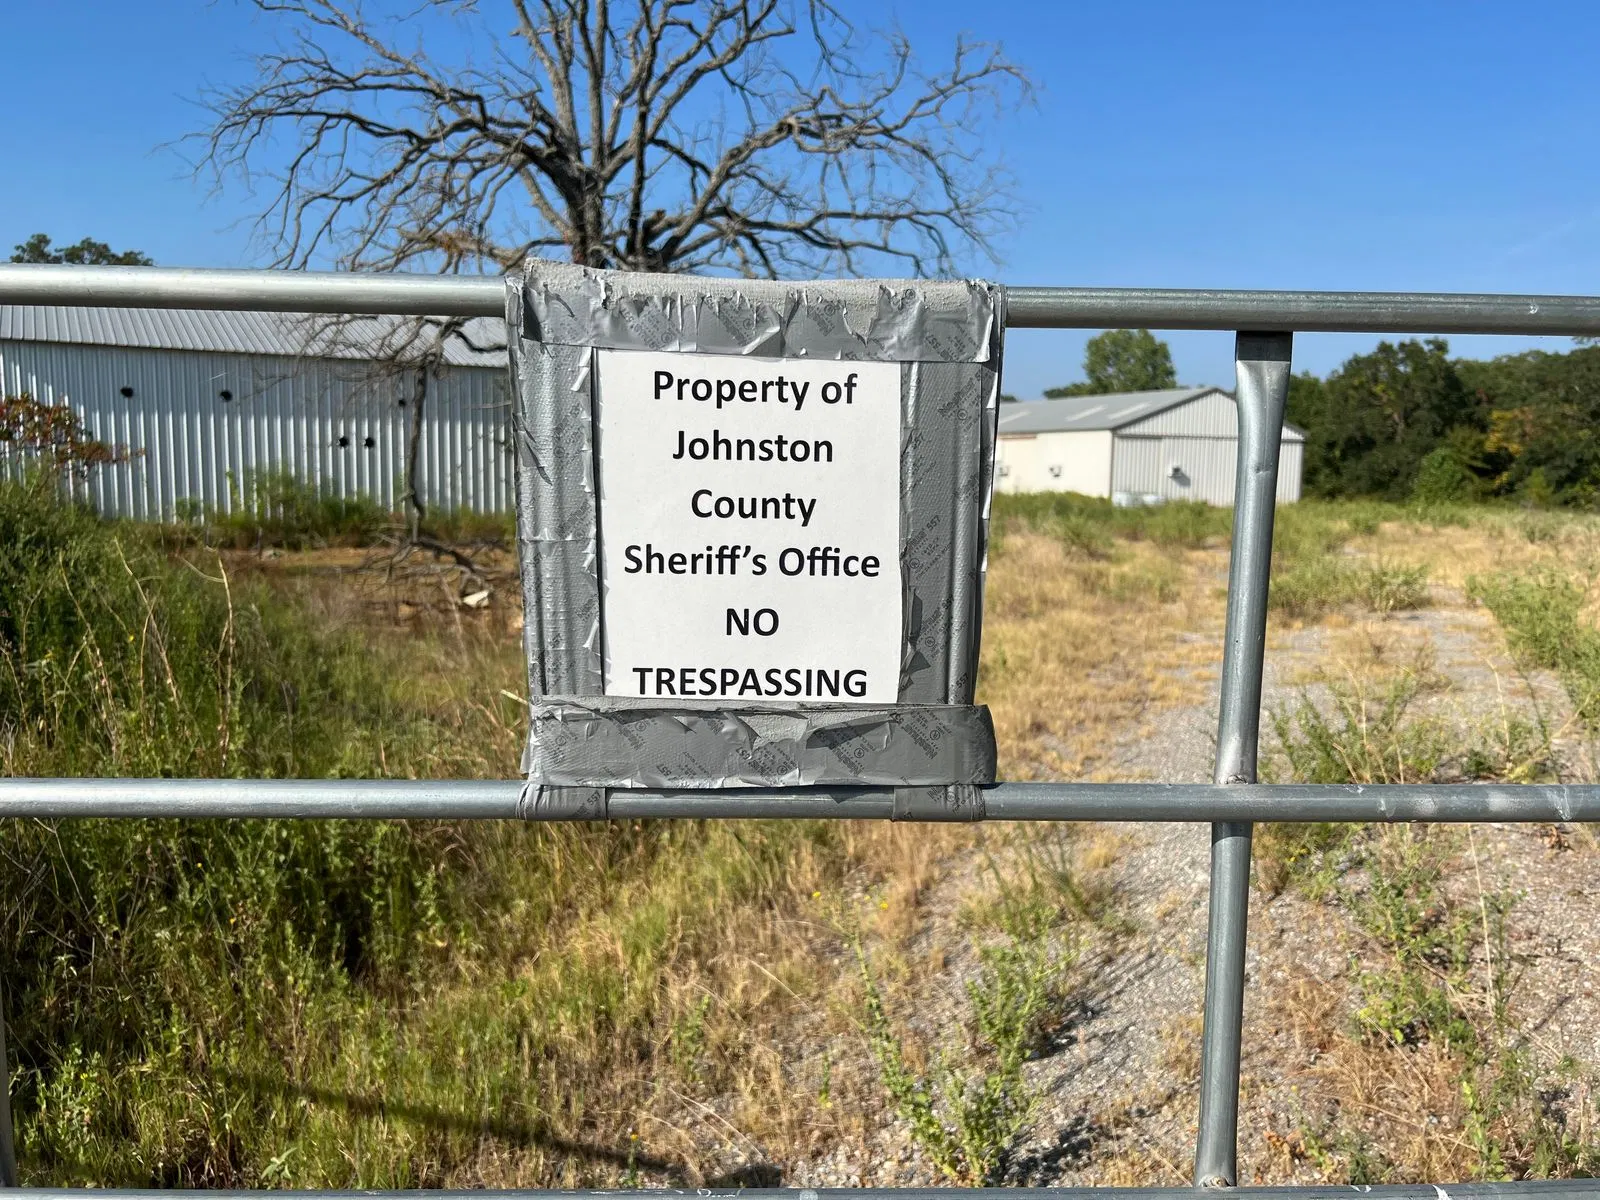 Former illegal marijuana farm up for auction in Johnston County: starting bid slashed to $100,000